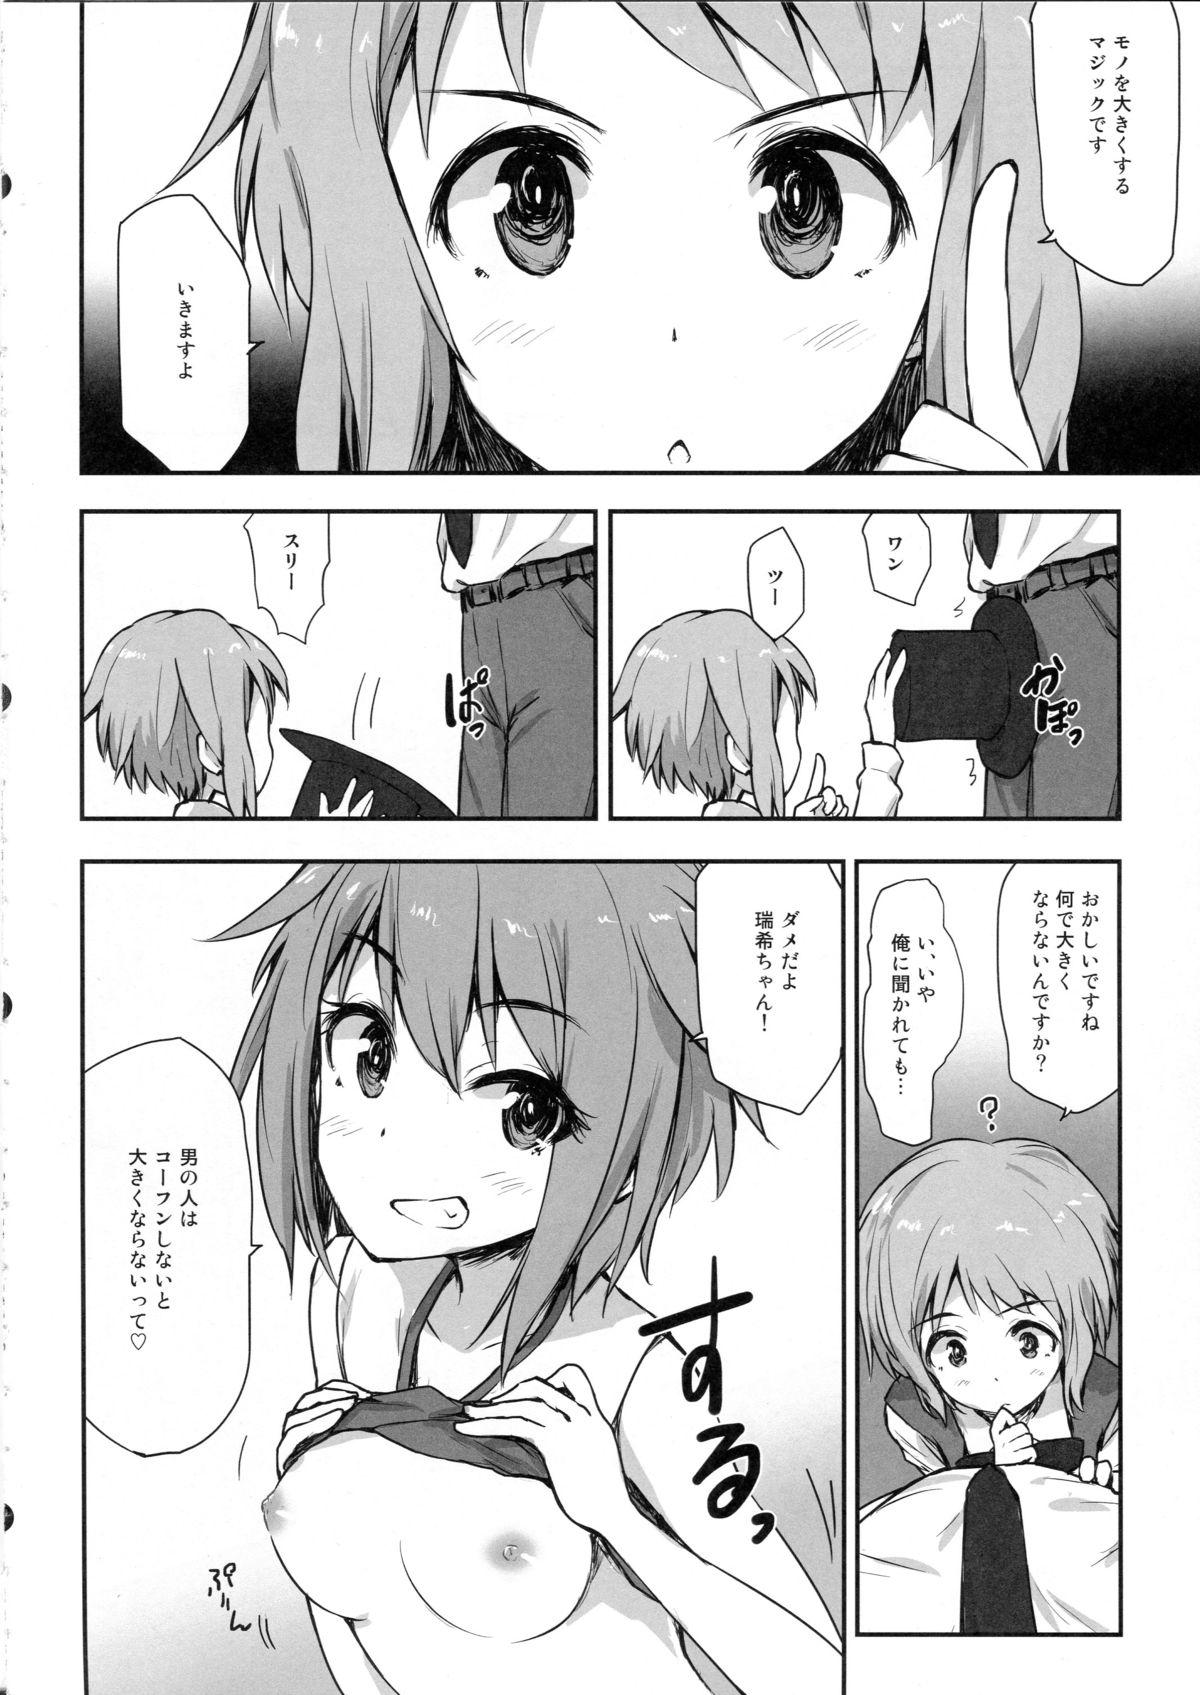 Fodendo juice - The idolmaster Cam - Page 5